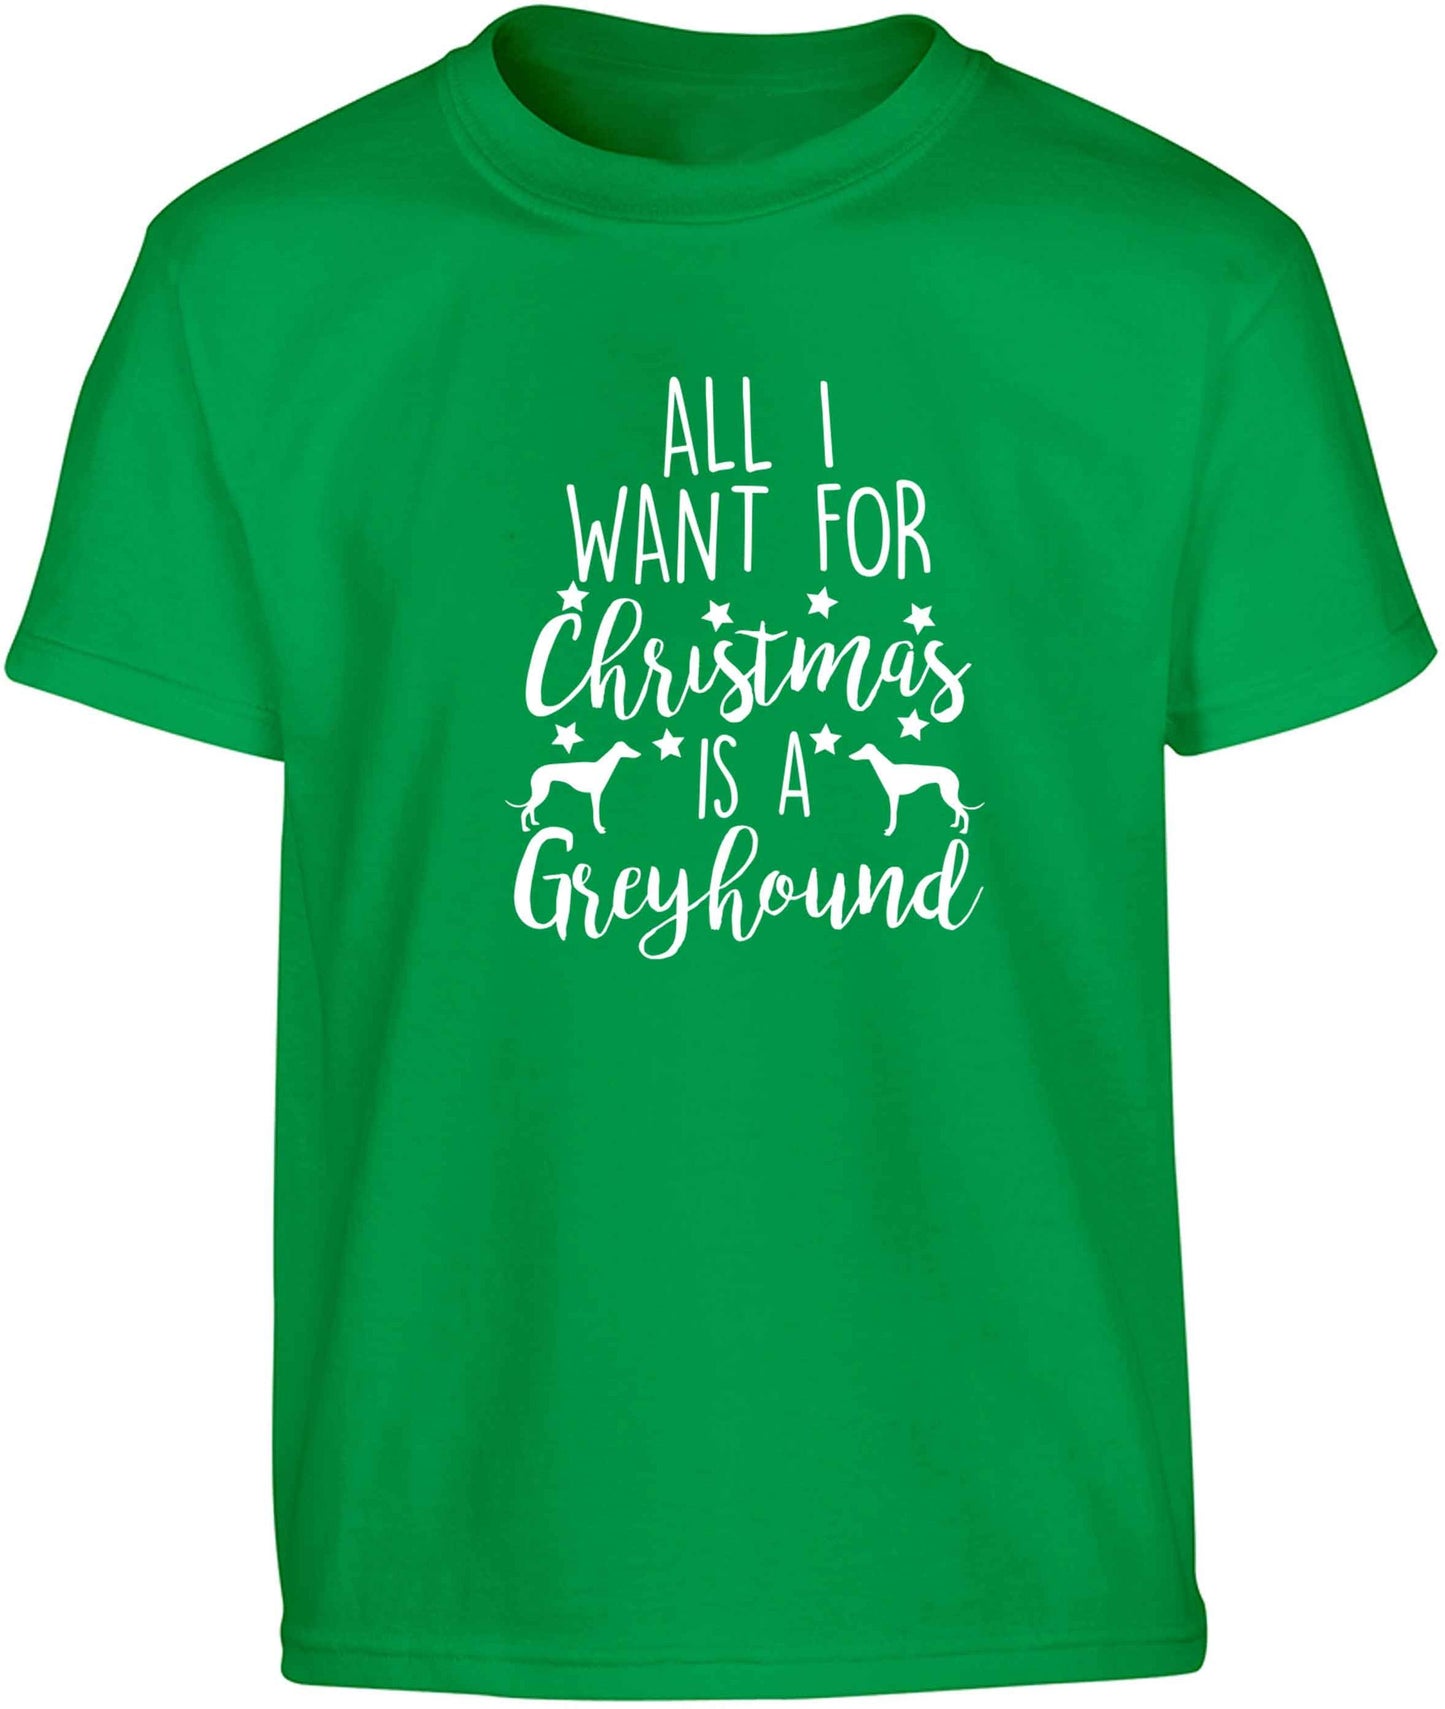 All I want for Christmas is a greyhound Children's green Tshirt 12-13 Years